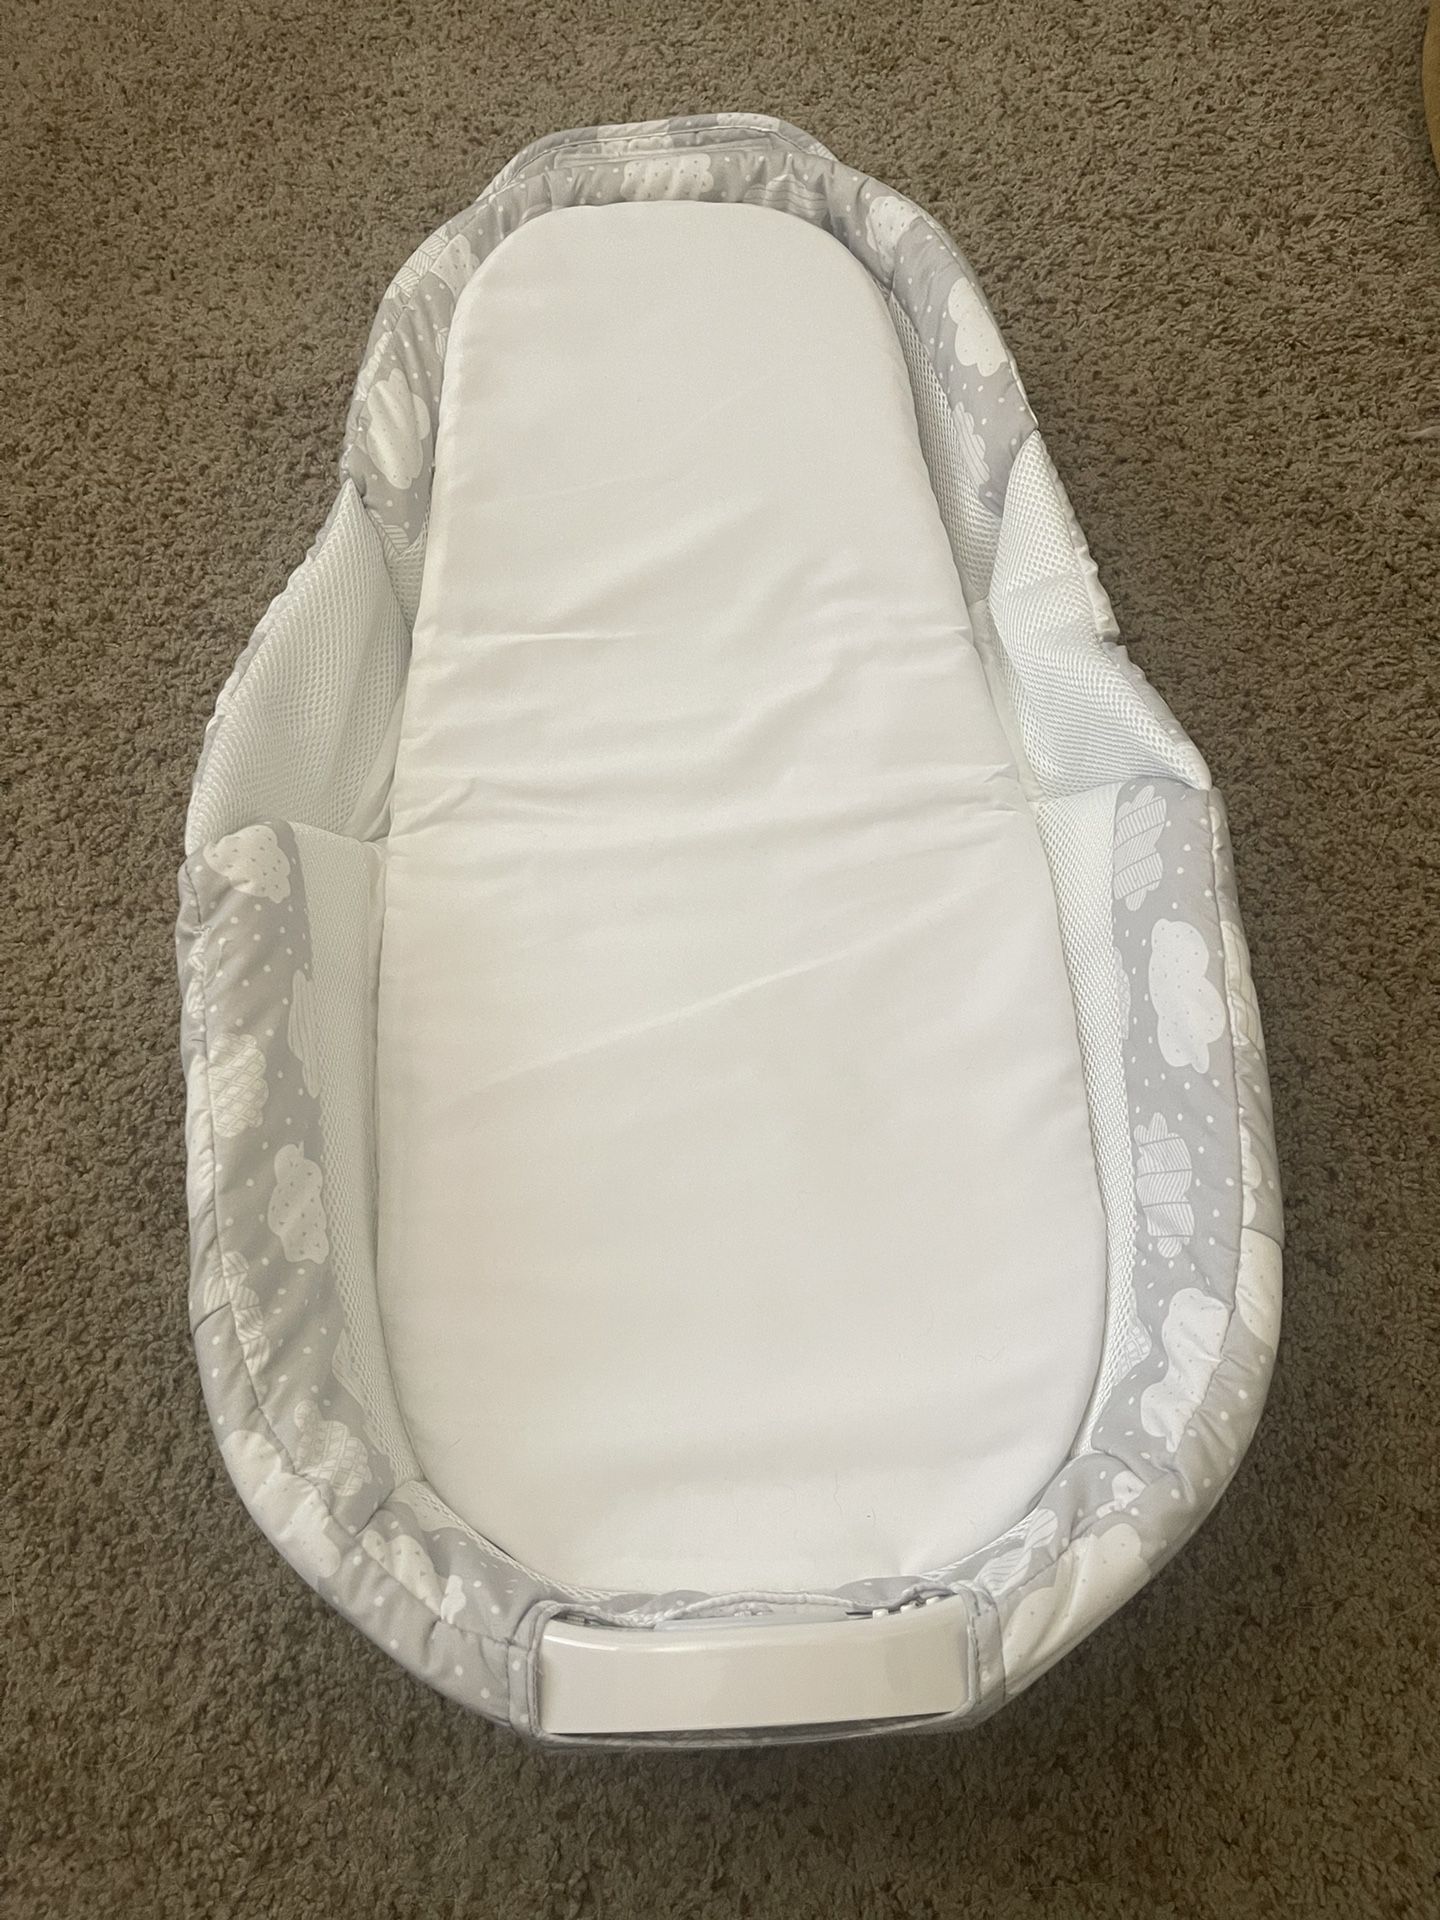 Snuggle Nest Baby Co Sleeper Bed